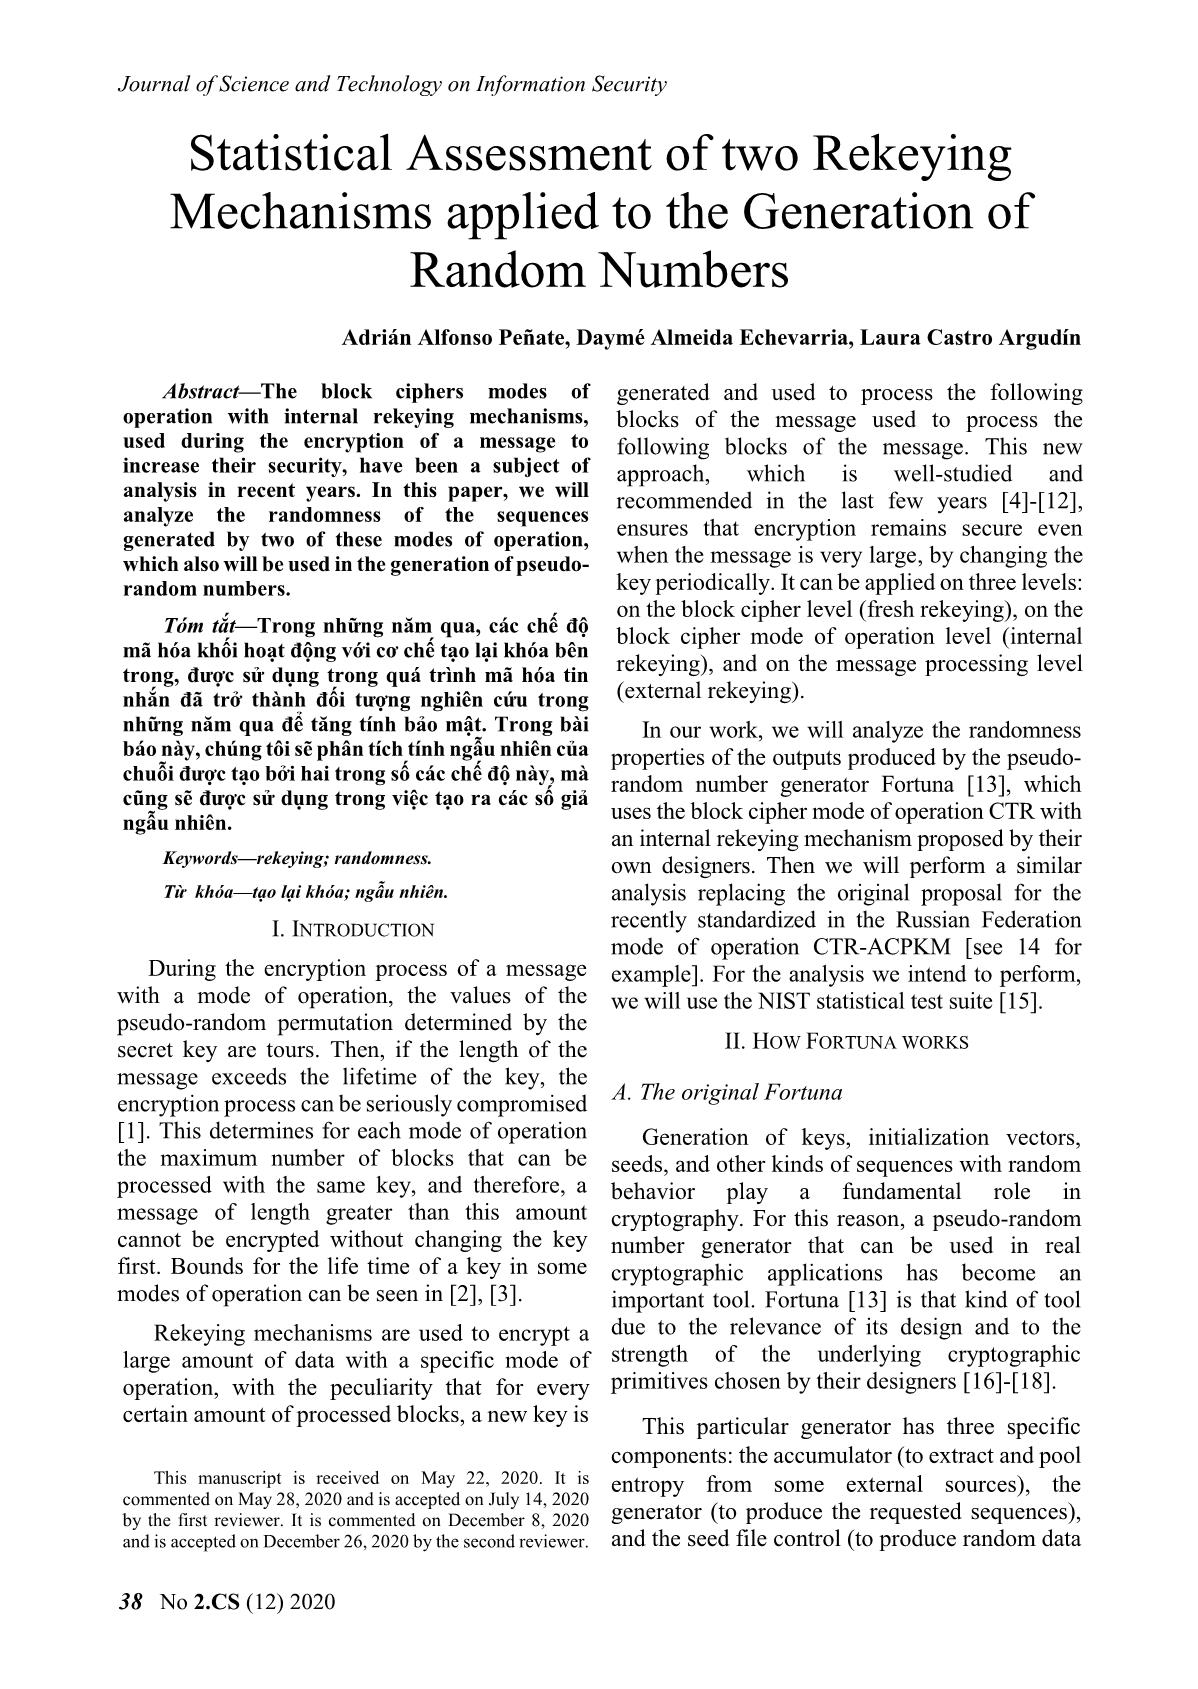 Statistical assessment of two rekeying mechanisms applied to the generation of random numbers trang 1